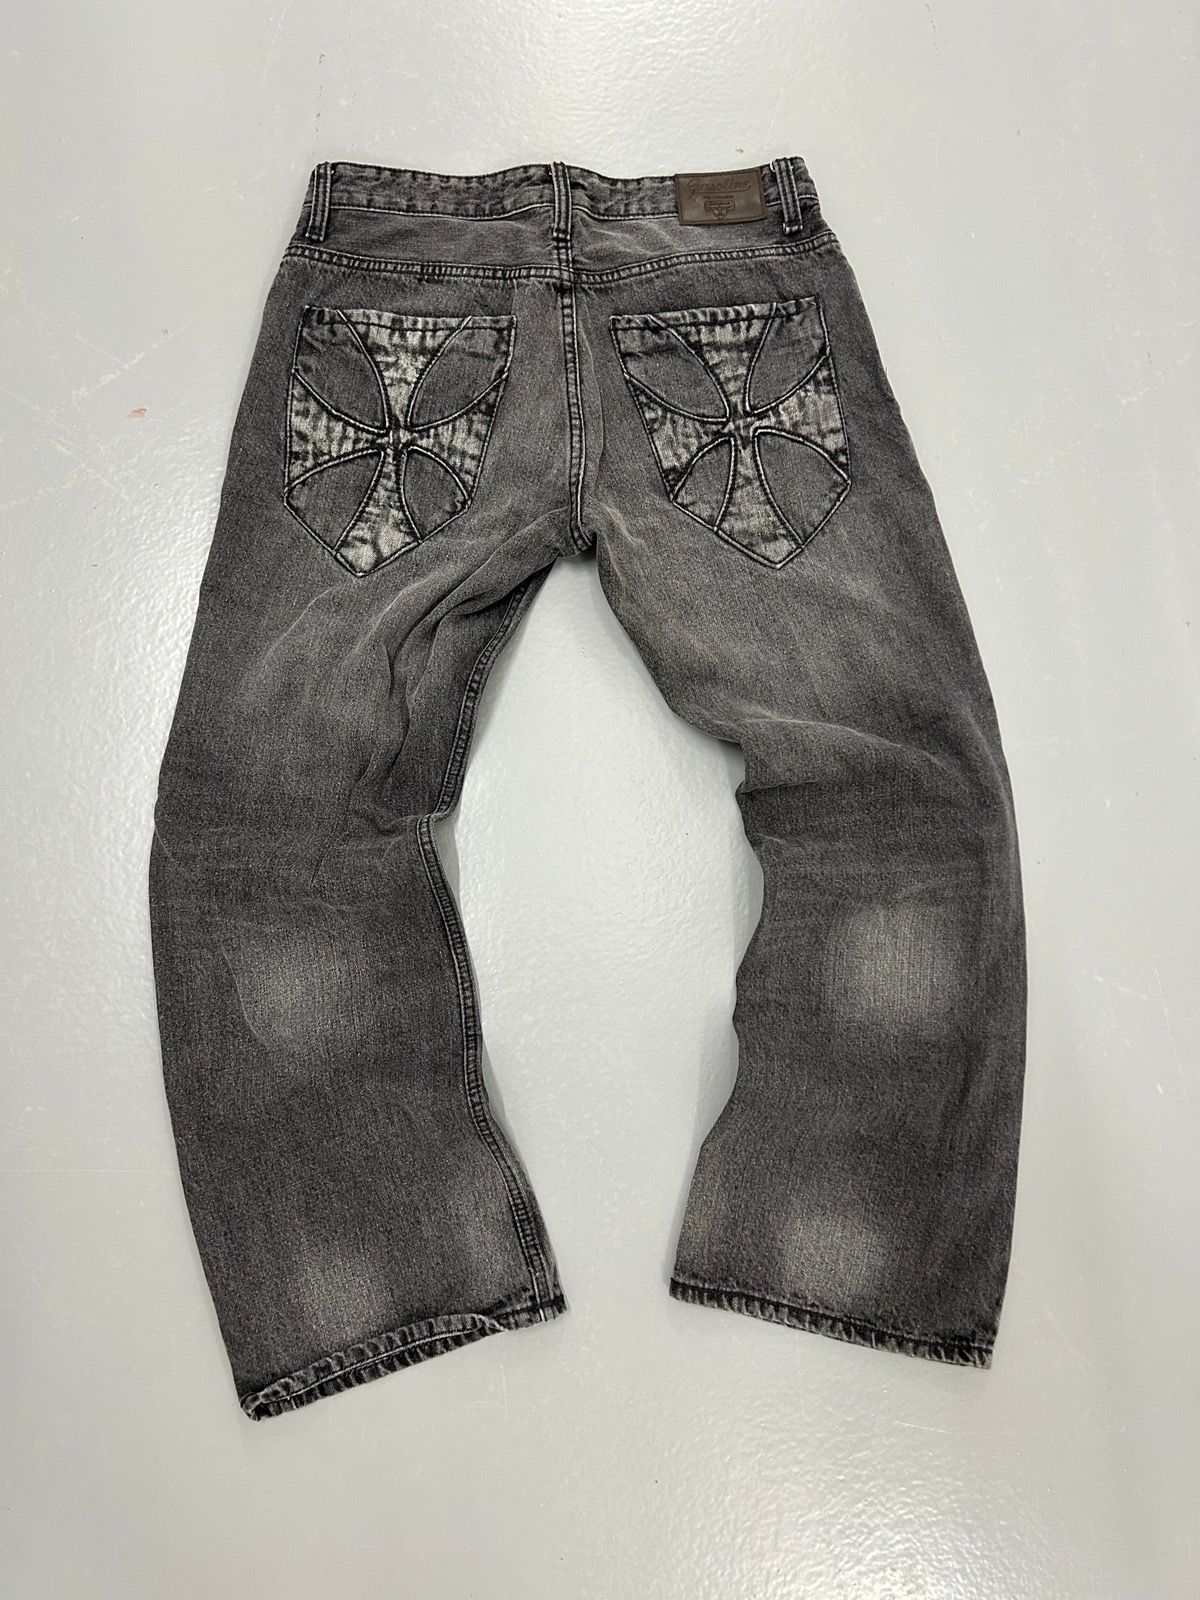 Pre-owned Affliction X Jnco Crazy Vintage Y2k Affliction Cross Style Faded Black Grunge